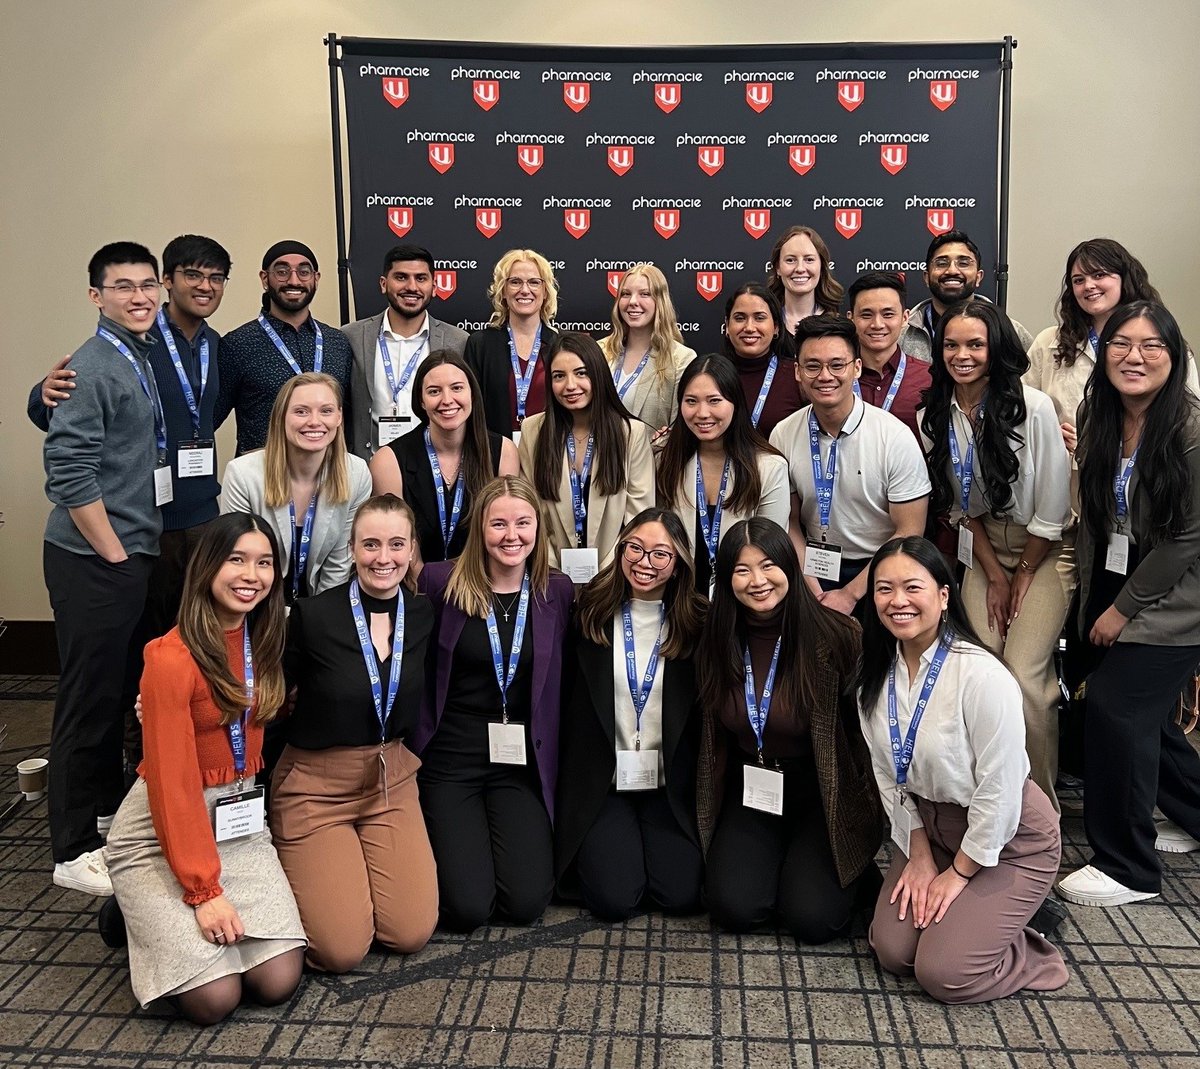 It was so great to see and connect with our #WaterlooPharmacy students and alumni at the @PharmacyU conference this past weekend! #PharmacyU